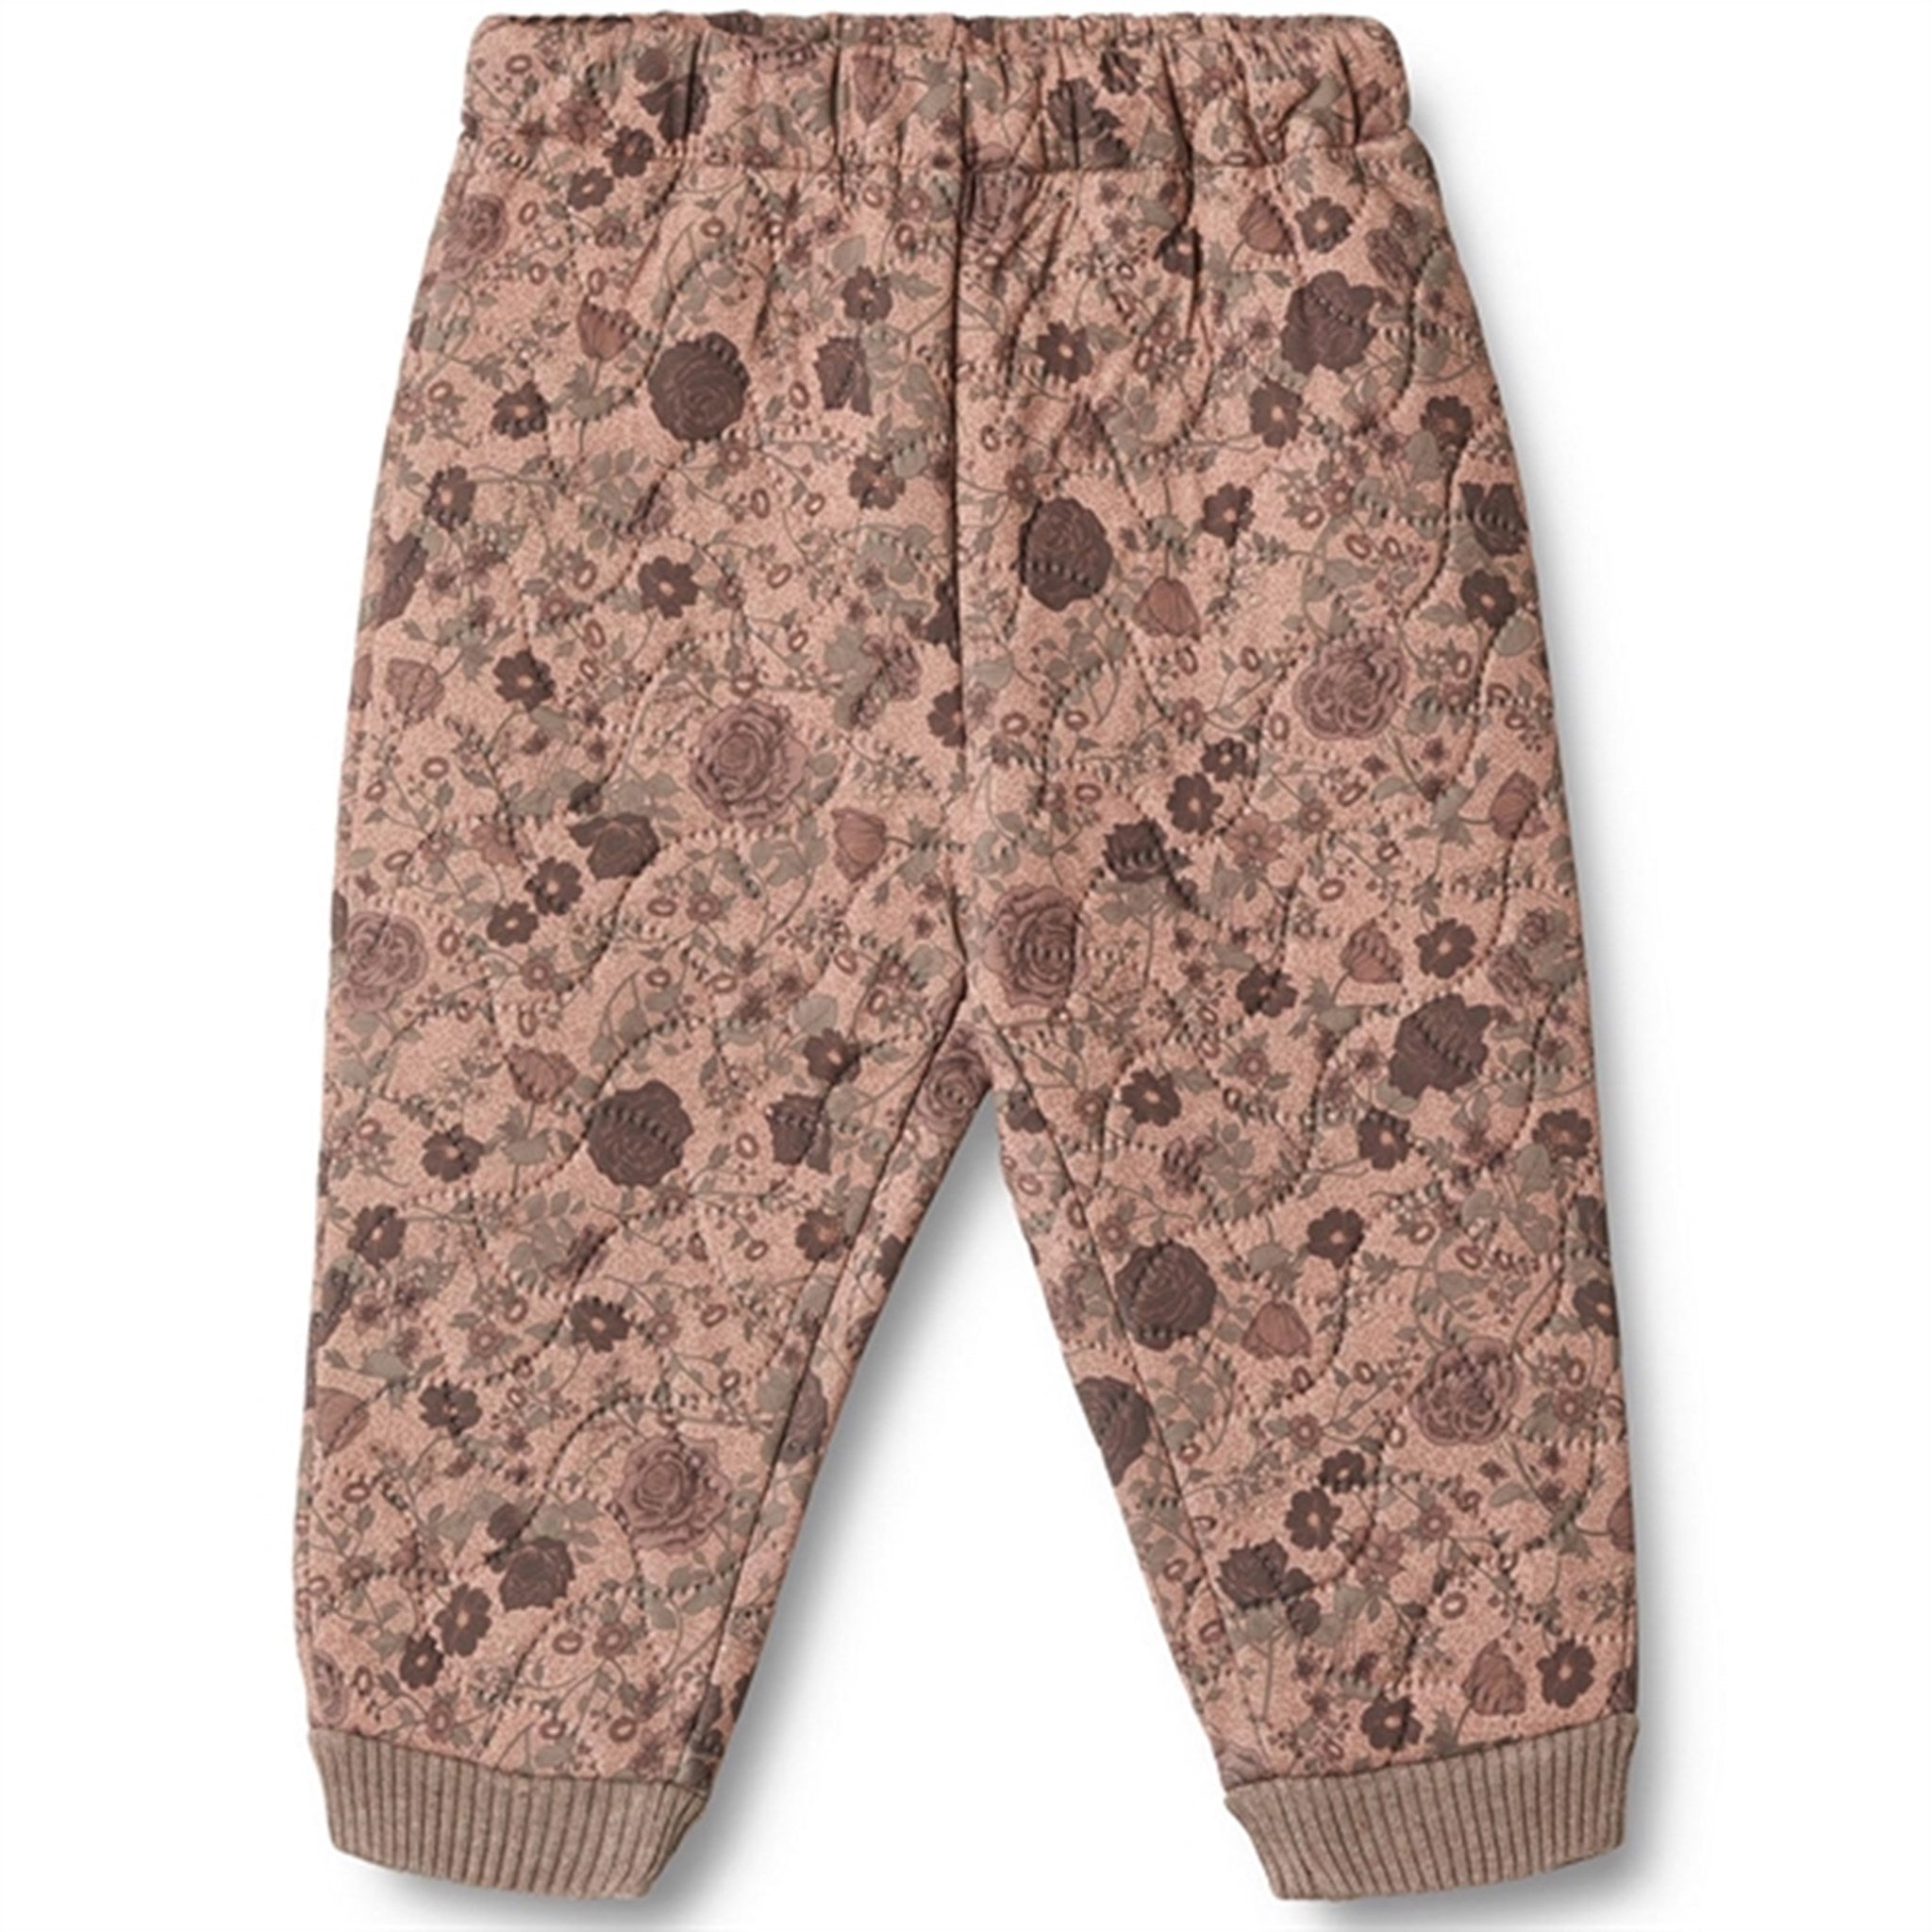 Wheat Thermo Rose Dawn Flowers Pants Alex